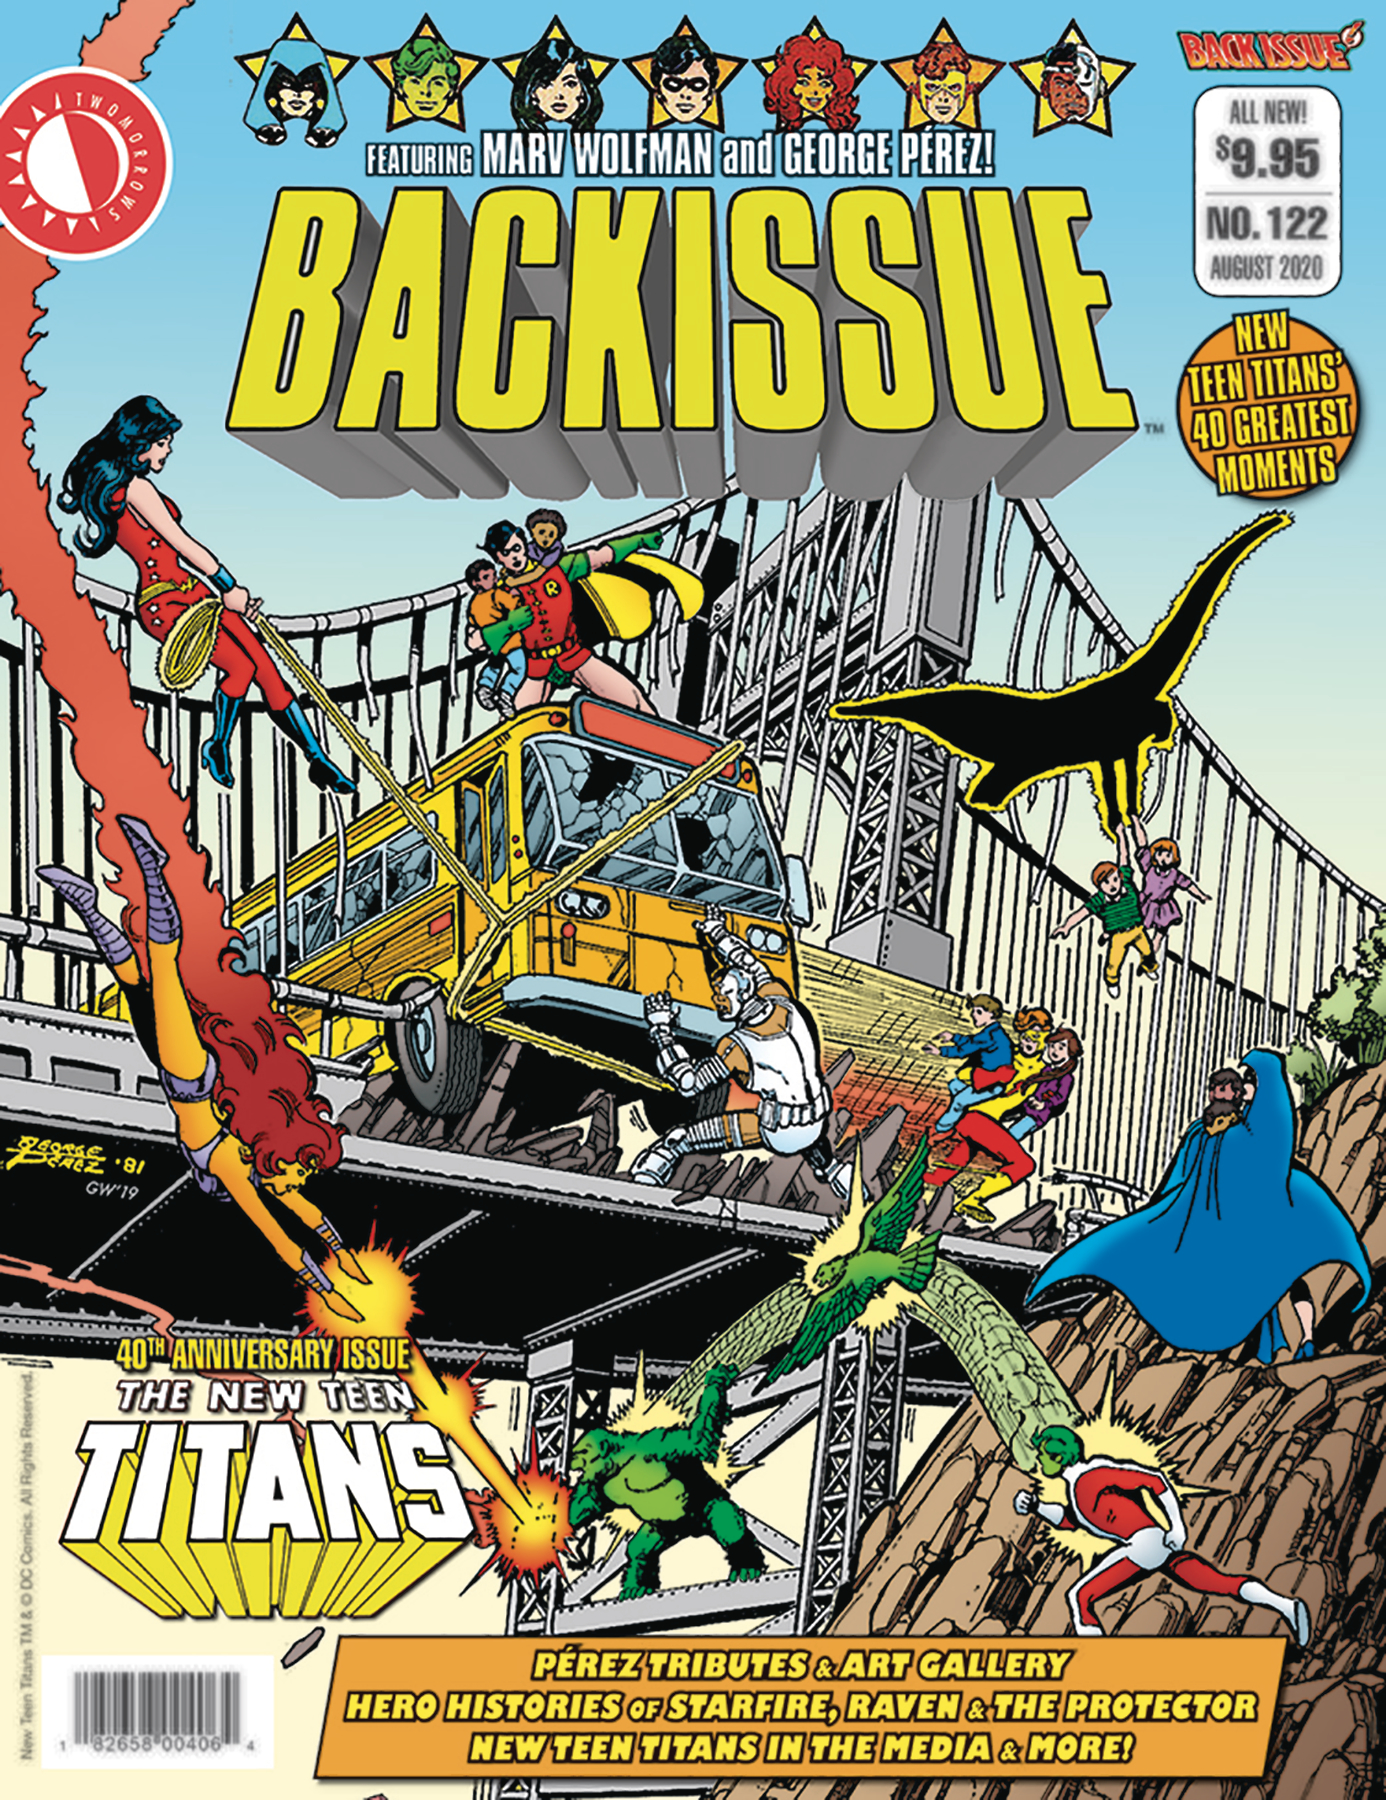 Back Issue #122